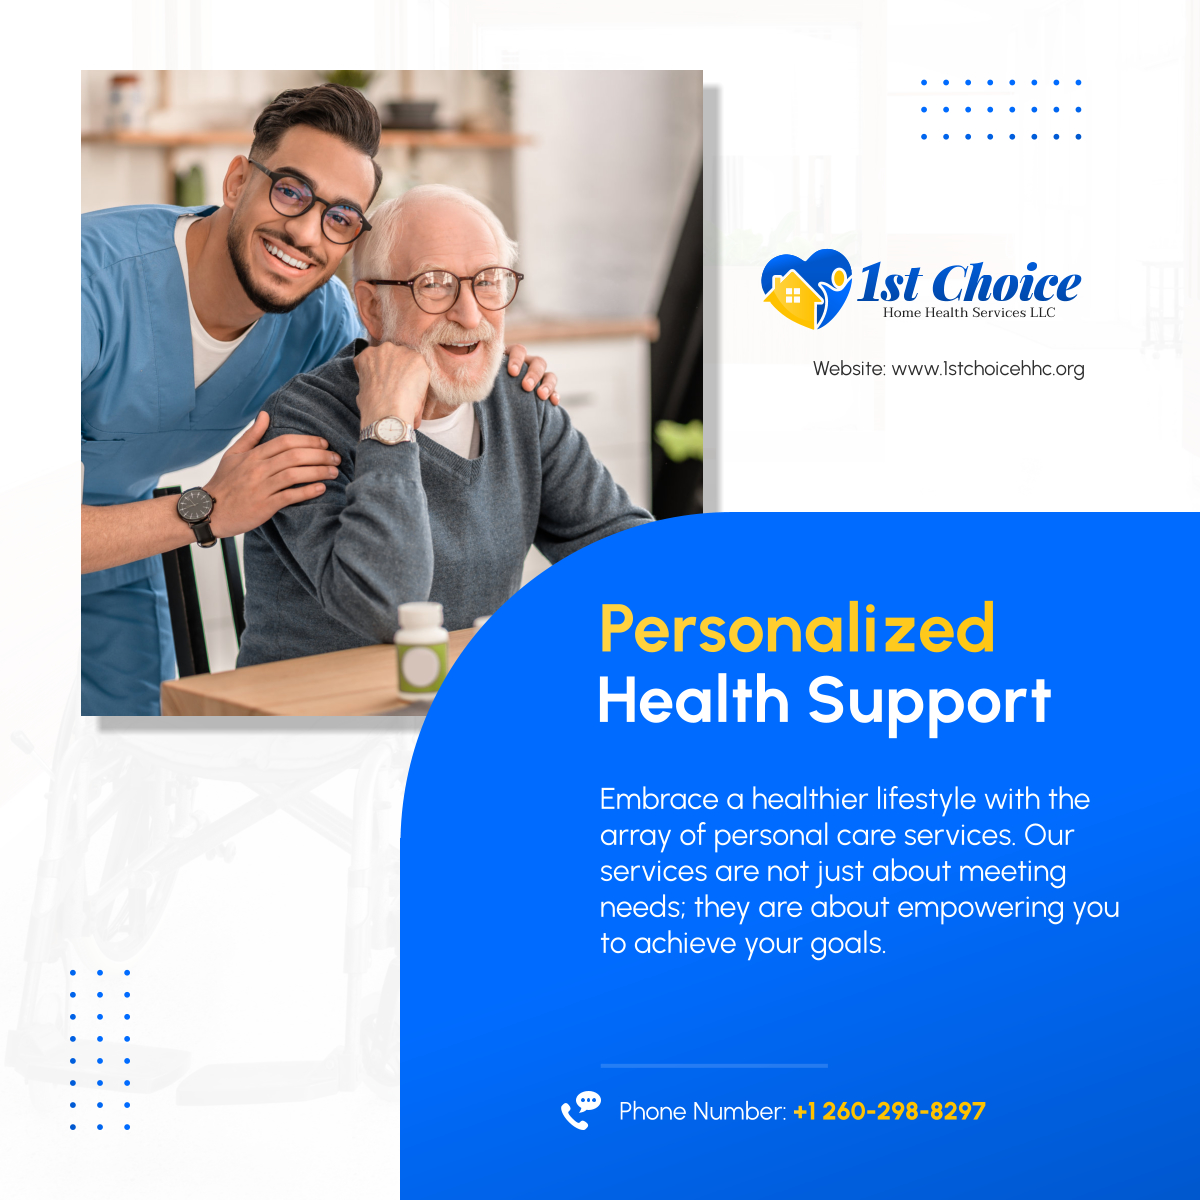 Wellness is personalized for you—because your health journey is as unique as you are. Discover personalized support that extends beyond the ordinary approach.  

#FortWayneIN #PersonalizedHealthSupport #HealthEmpowerment #PersonalizedSupport #HomeHealthCare